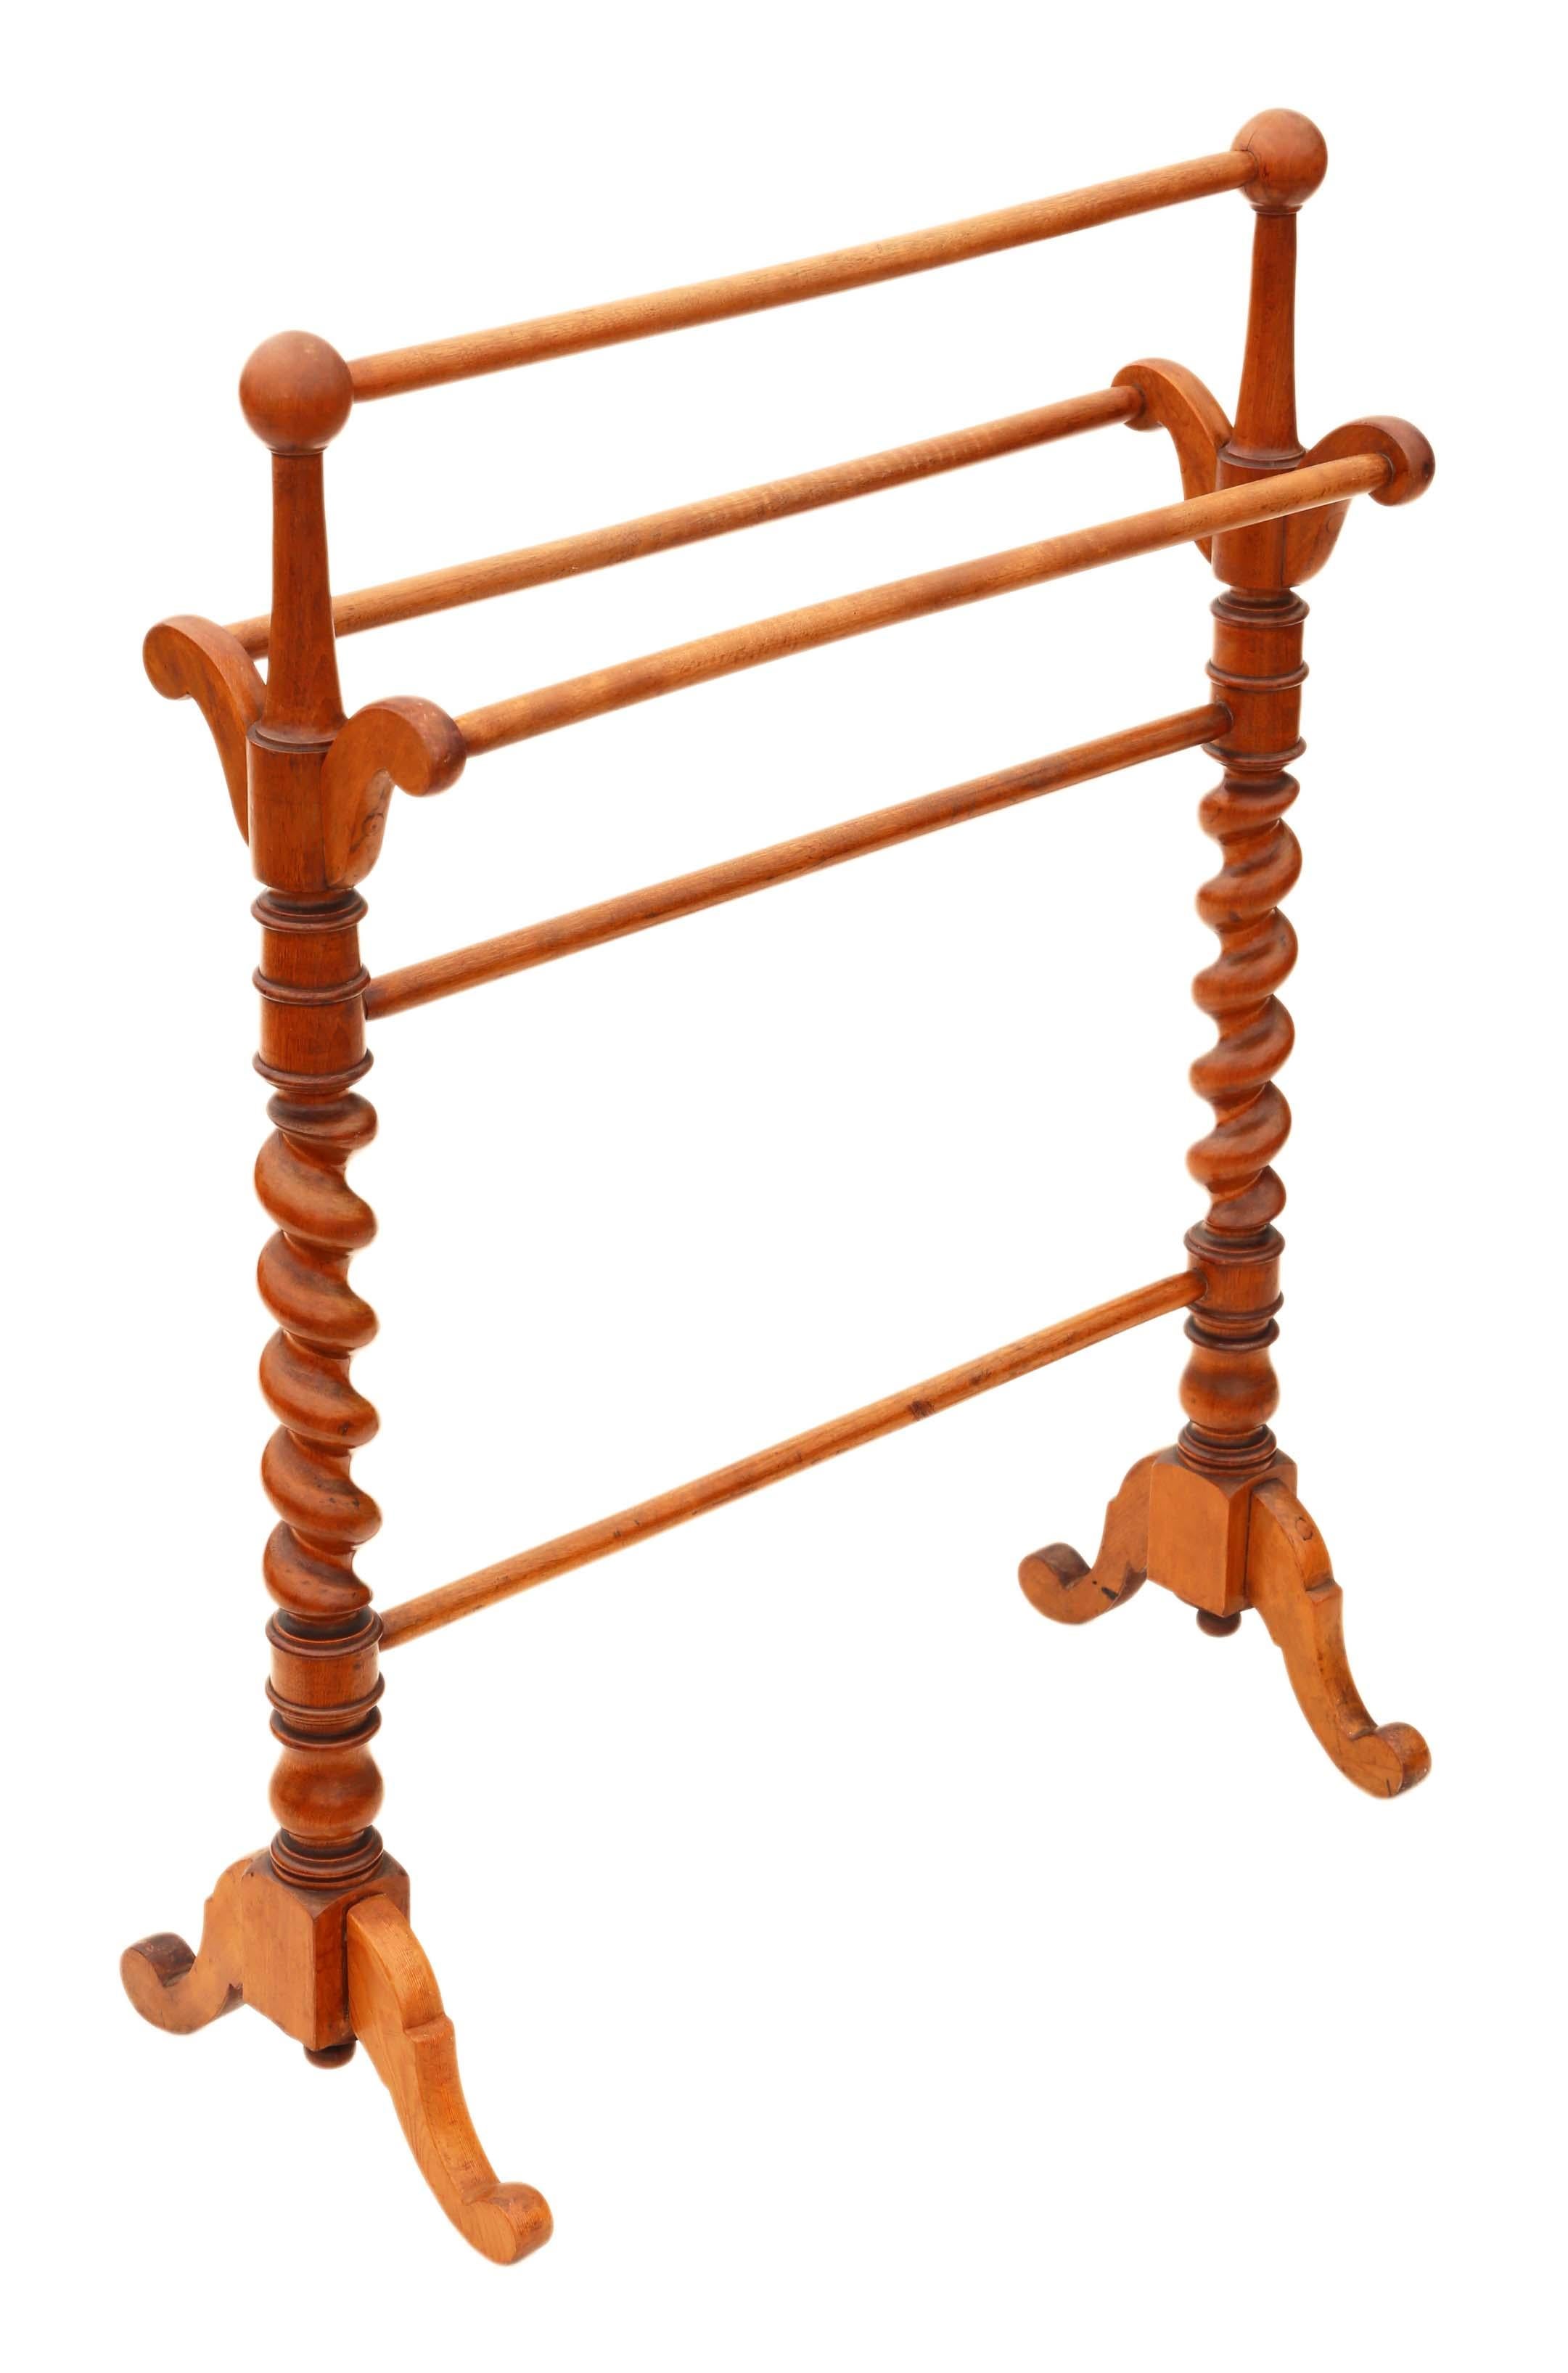 Antique quality Victorian circa 1870 mahogany towel rail stand.
This item is solid and strong, with no loose joints.
No woodworm.
Would look amazing in the right location!
Overall maximum dimensions:
74cm W x 33cm D x 96cm H.
In very good